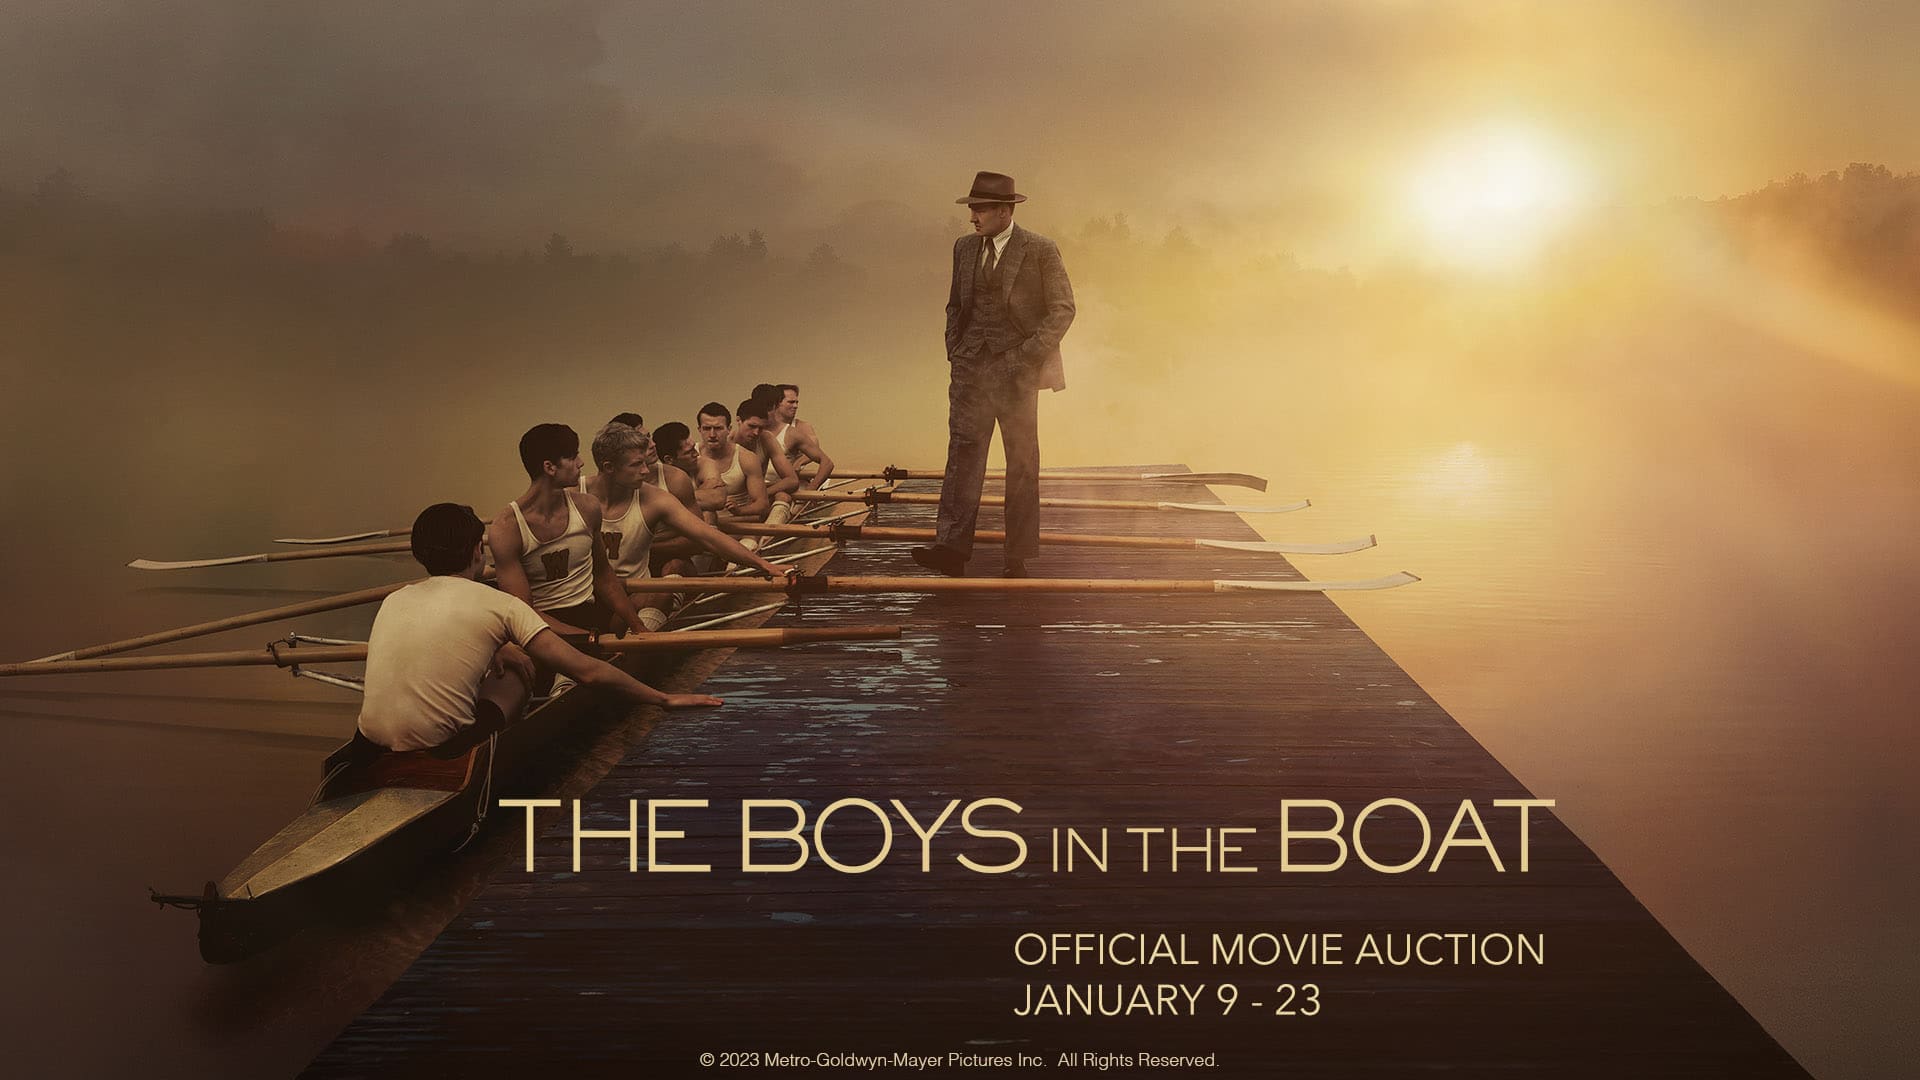 The Boys In The Boat Press Release